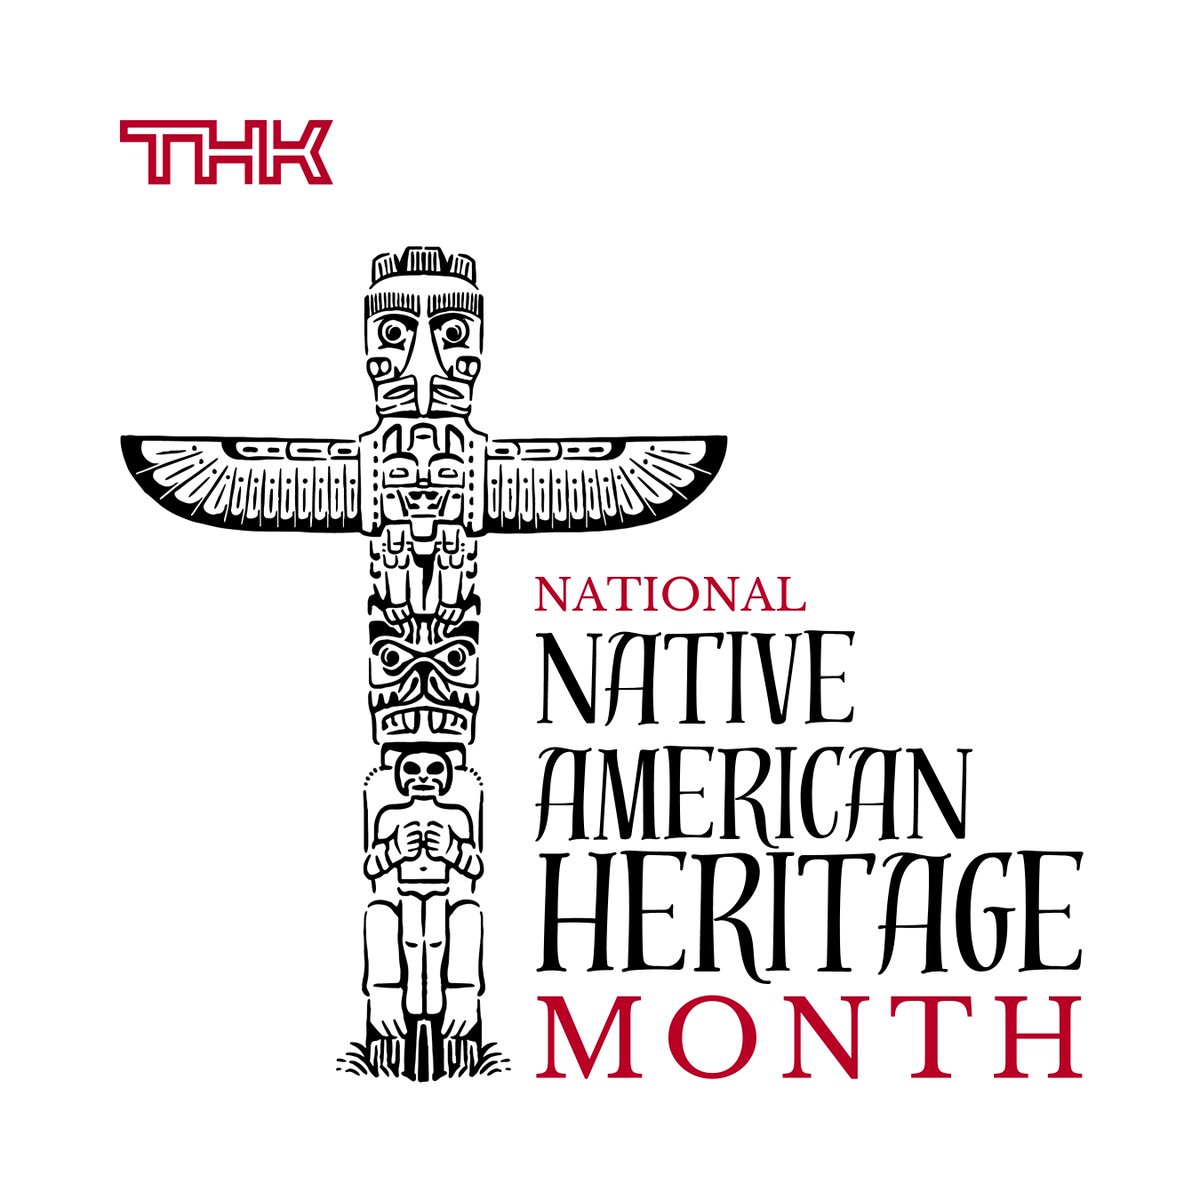 This November, THK Manufacturing of America, Inc. pays tribute to National Native American Heritage Month. ✨ #NativeAmericanHeritageMonth #THK #Manufacturing #TMA #CelebratingCulture #StrengthInDiversity #HeritageAppreciation